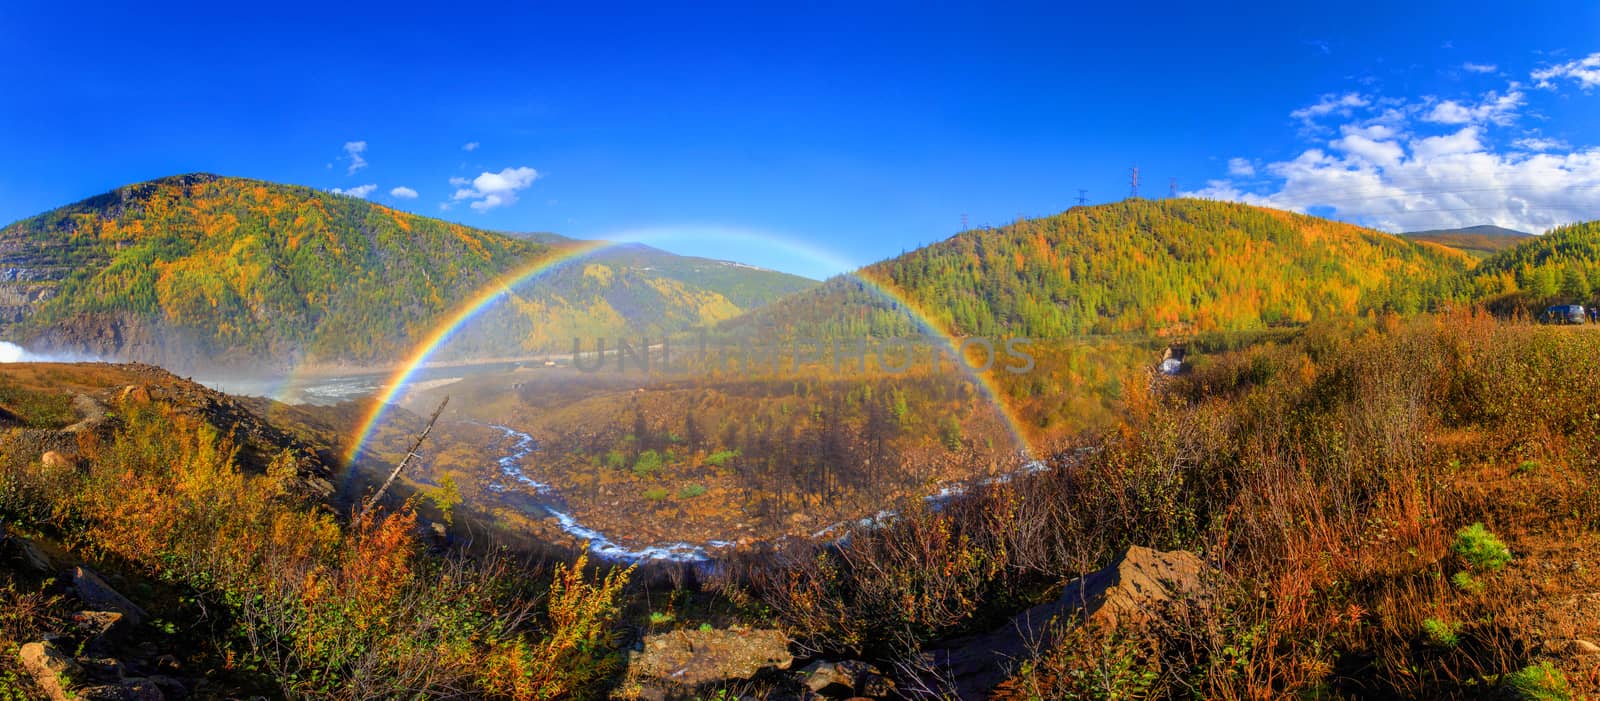 A beautiful bright rainbow in full size against the background of autumn hills and a small stream. Rainbow on hydroelectricity during spillway by PrimDiscovery